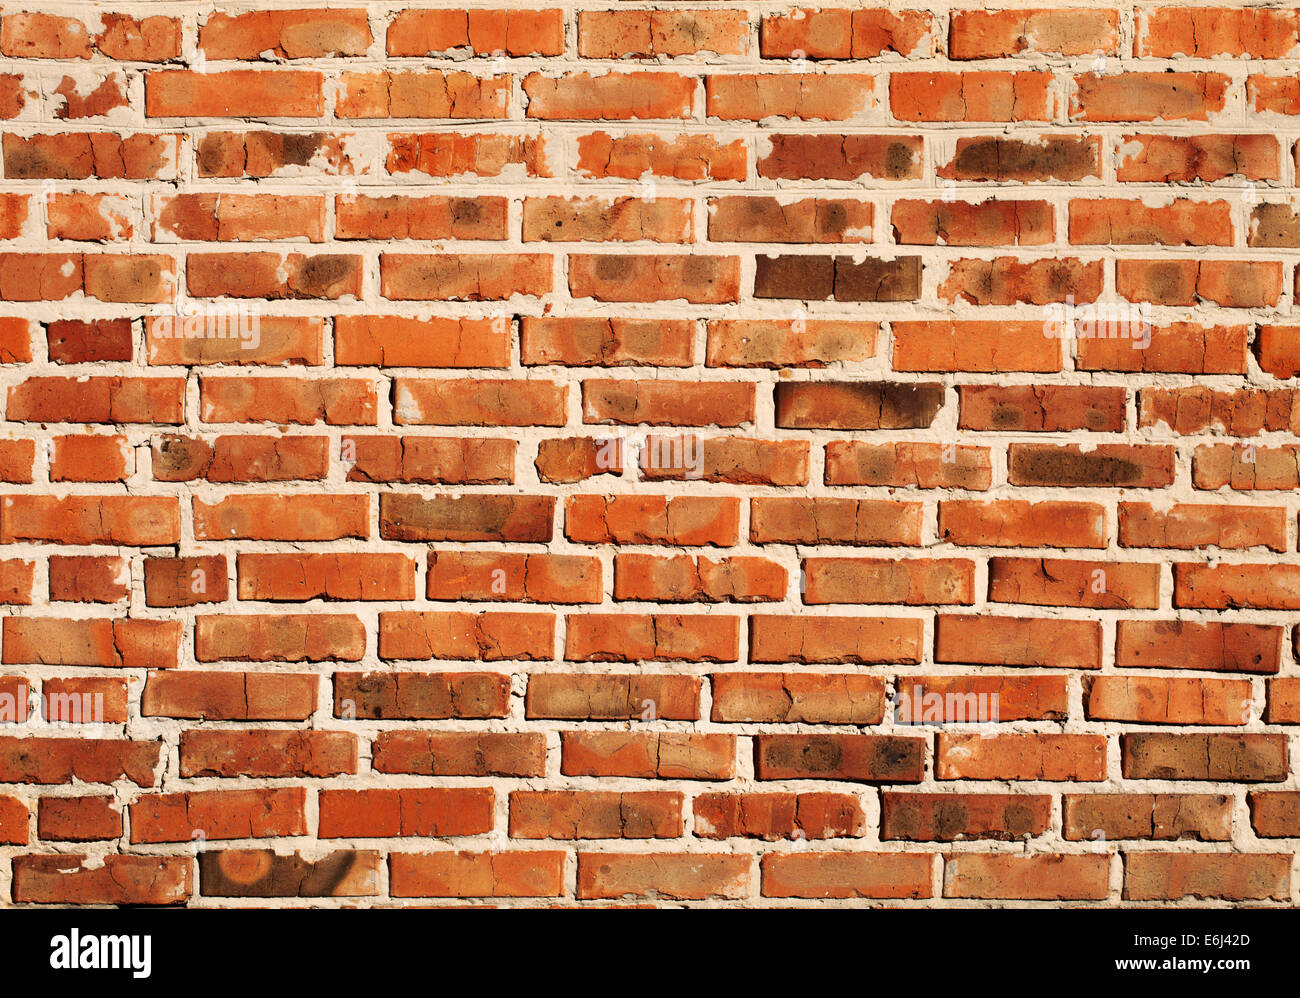 Red brick wall background for your design Stock Photo